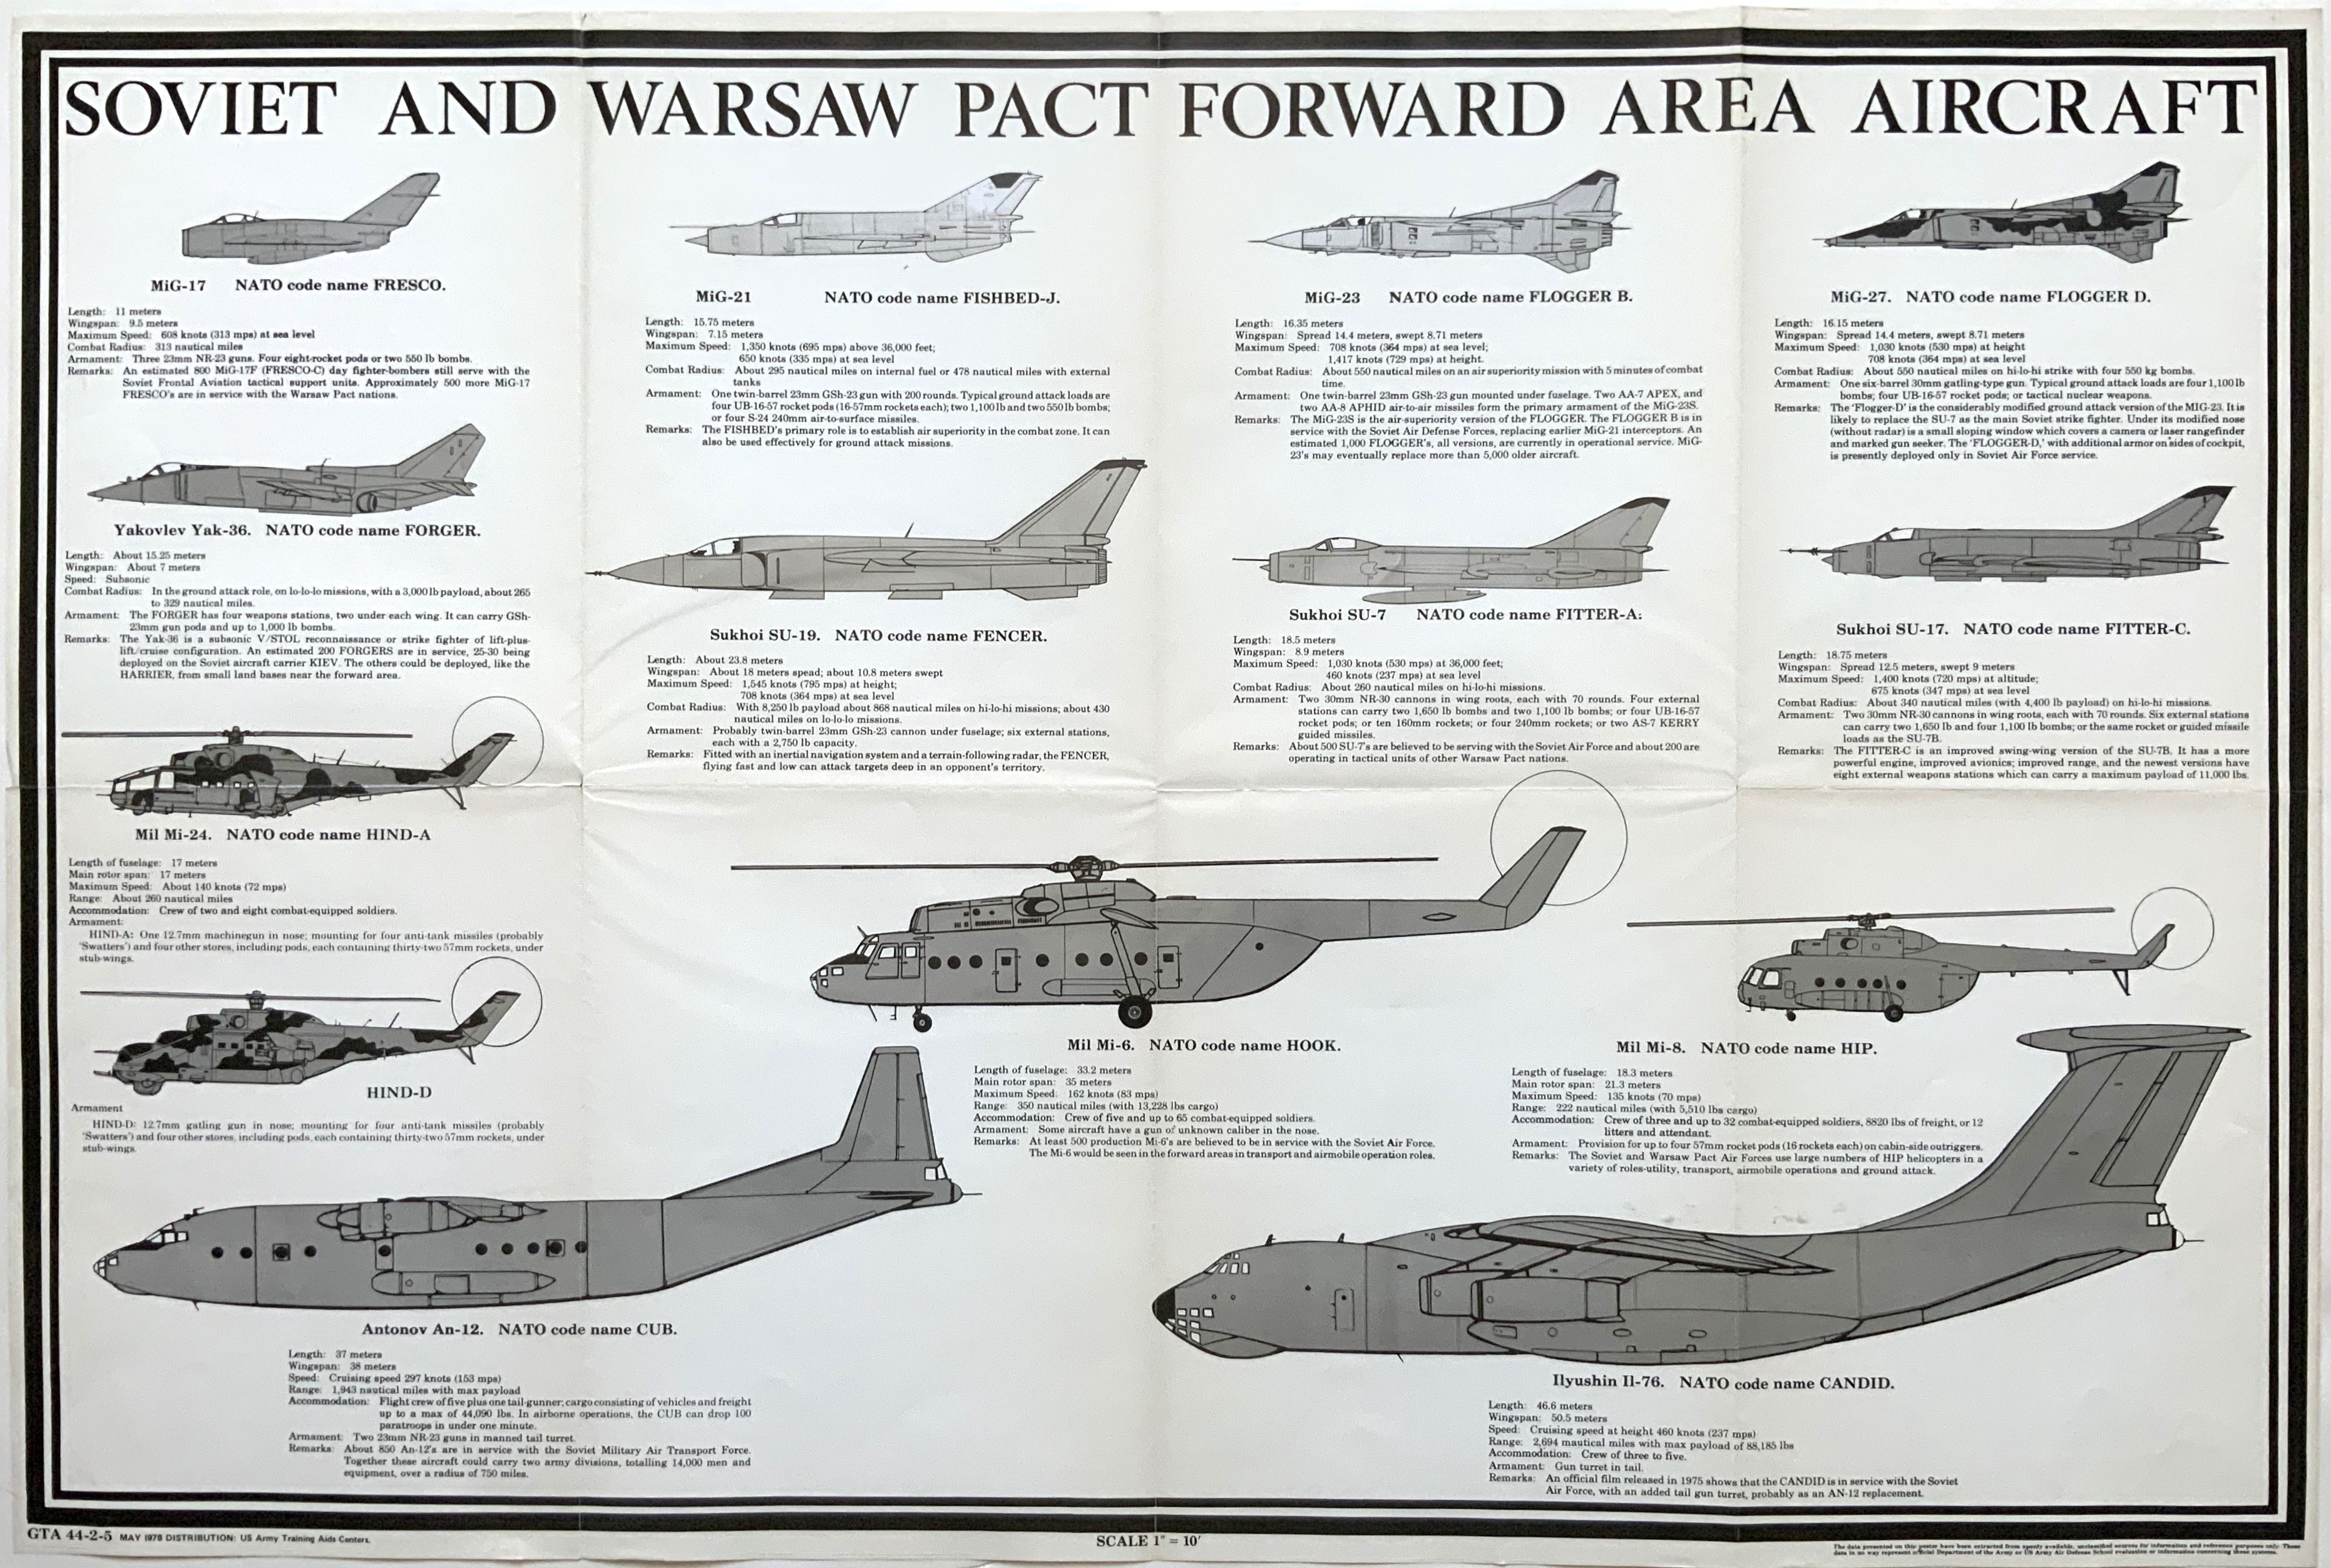 J564	SOVIET AND WARSAW PACT FORWARD AREA AIRCRAFT